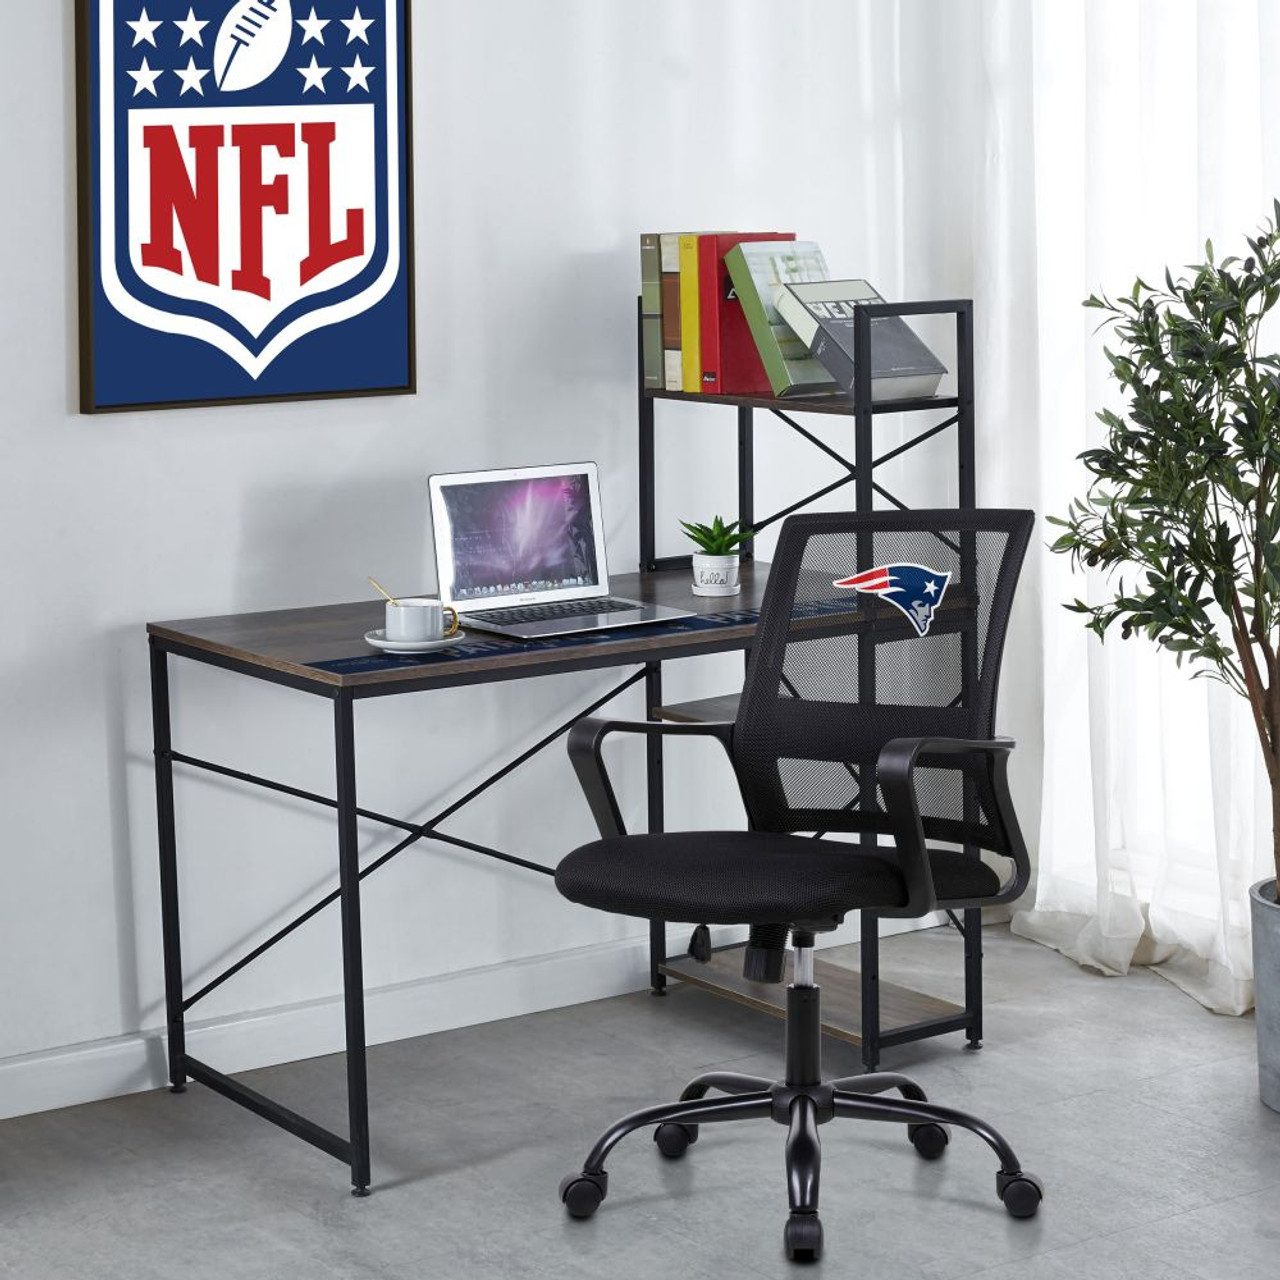 NE, New England, Pats, Patriots, Office, Task, Desk, Chair, 497-1011, Imperial, NFL, 720801911137